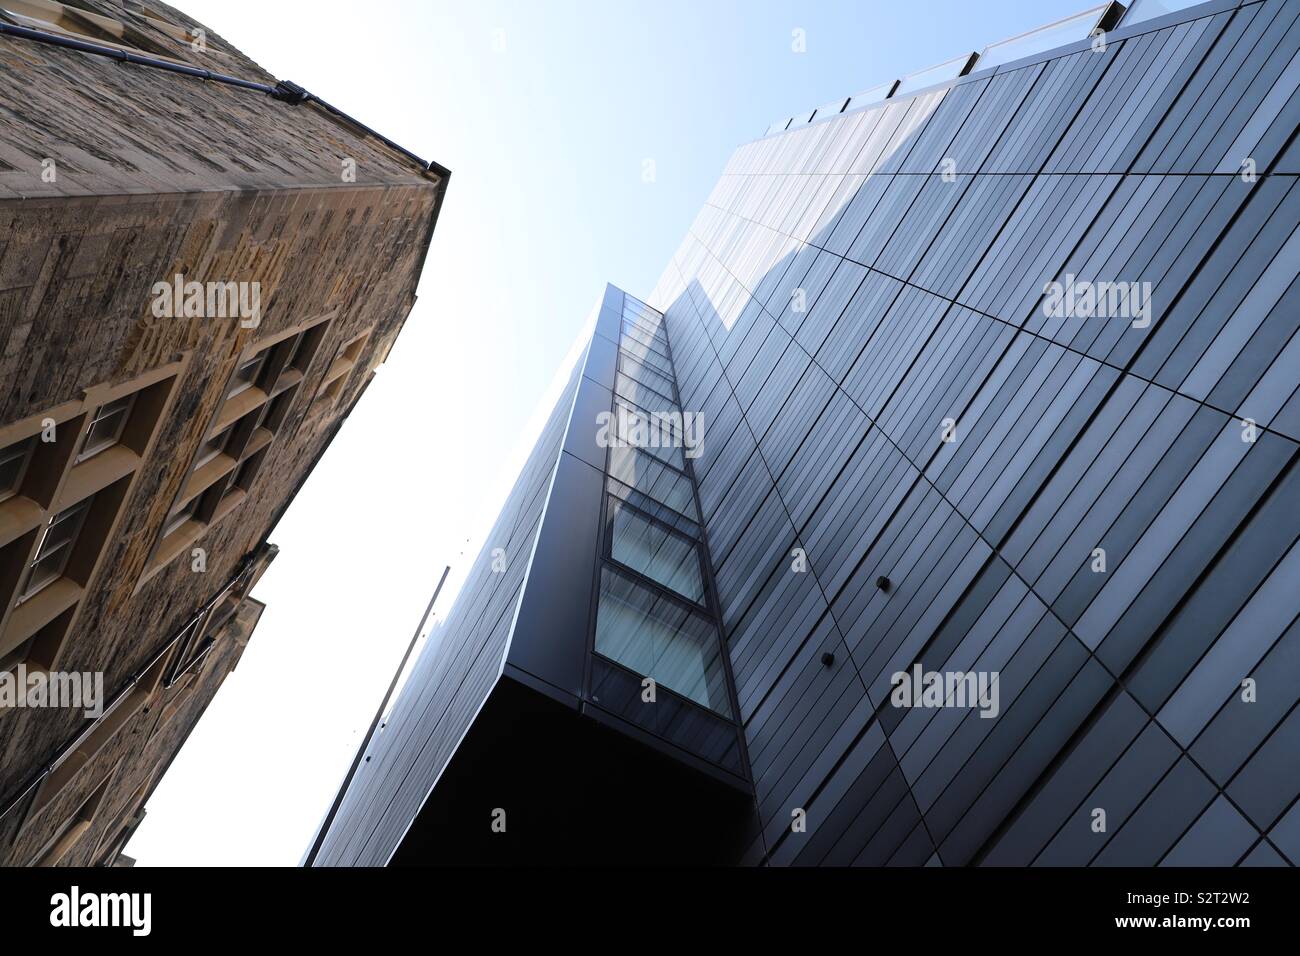 Abstract view of traditional and modern buildings Stock Photo